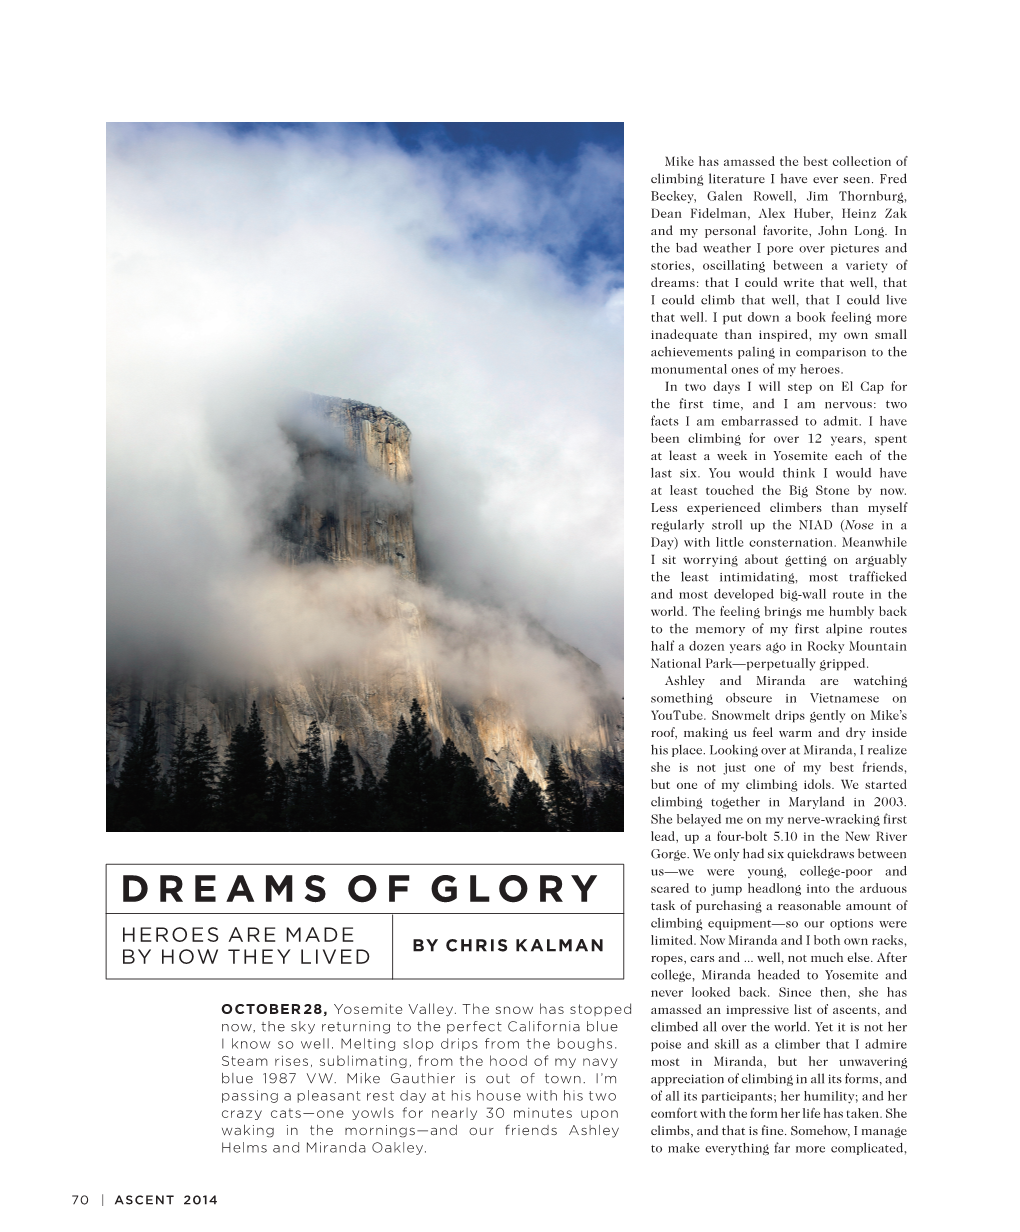 DREAMS of GLORY Task of Purchasing a Reasonable Amount of Climbing Equipment—So Our Options Were HEROES ARE MADE by CHRIS KALMAN Limited